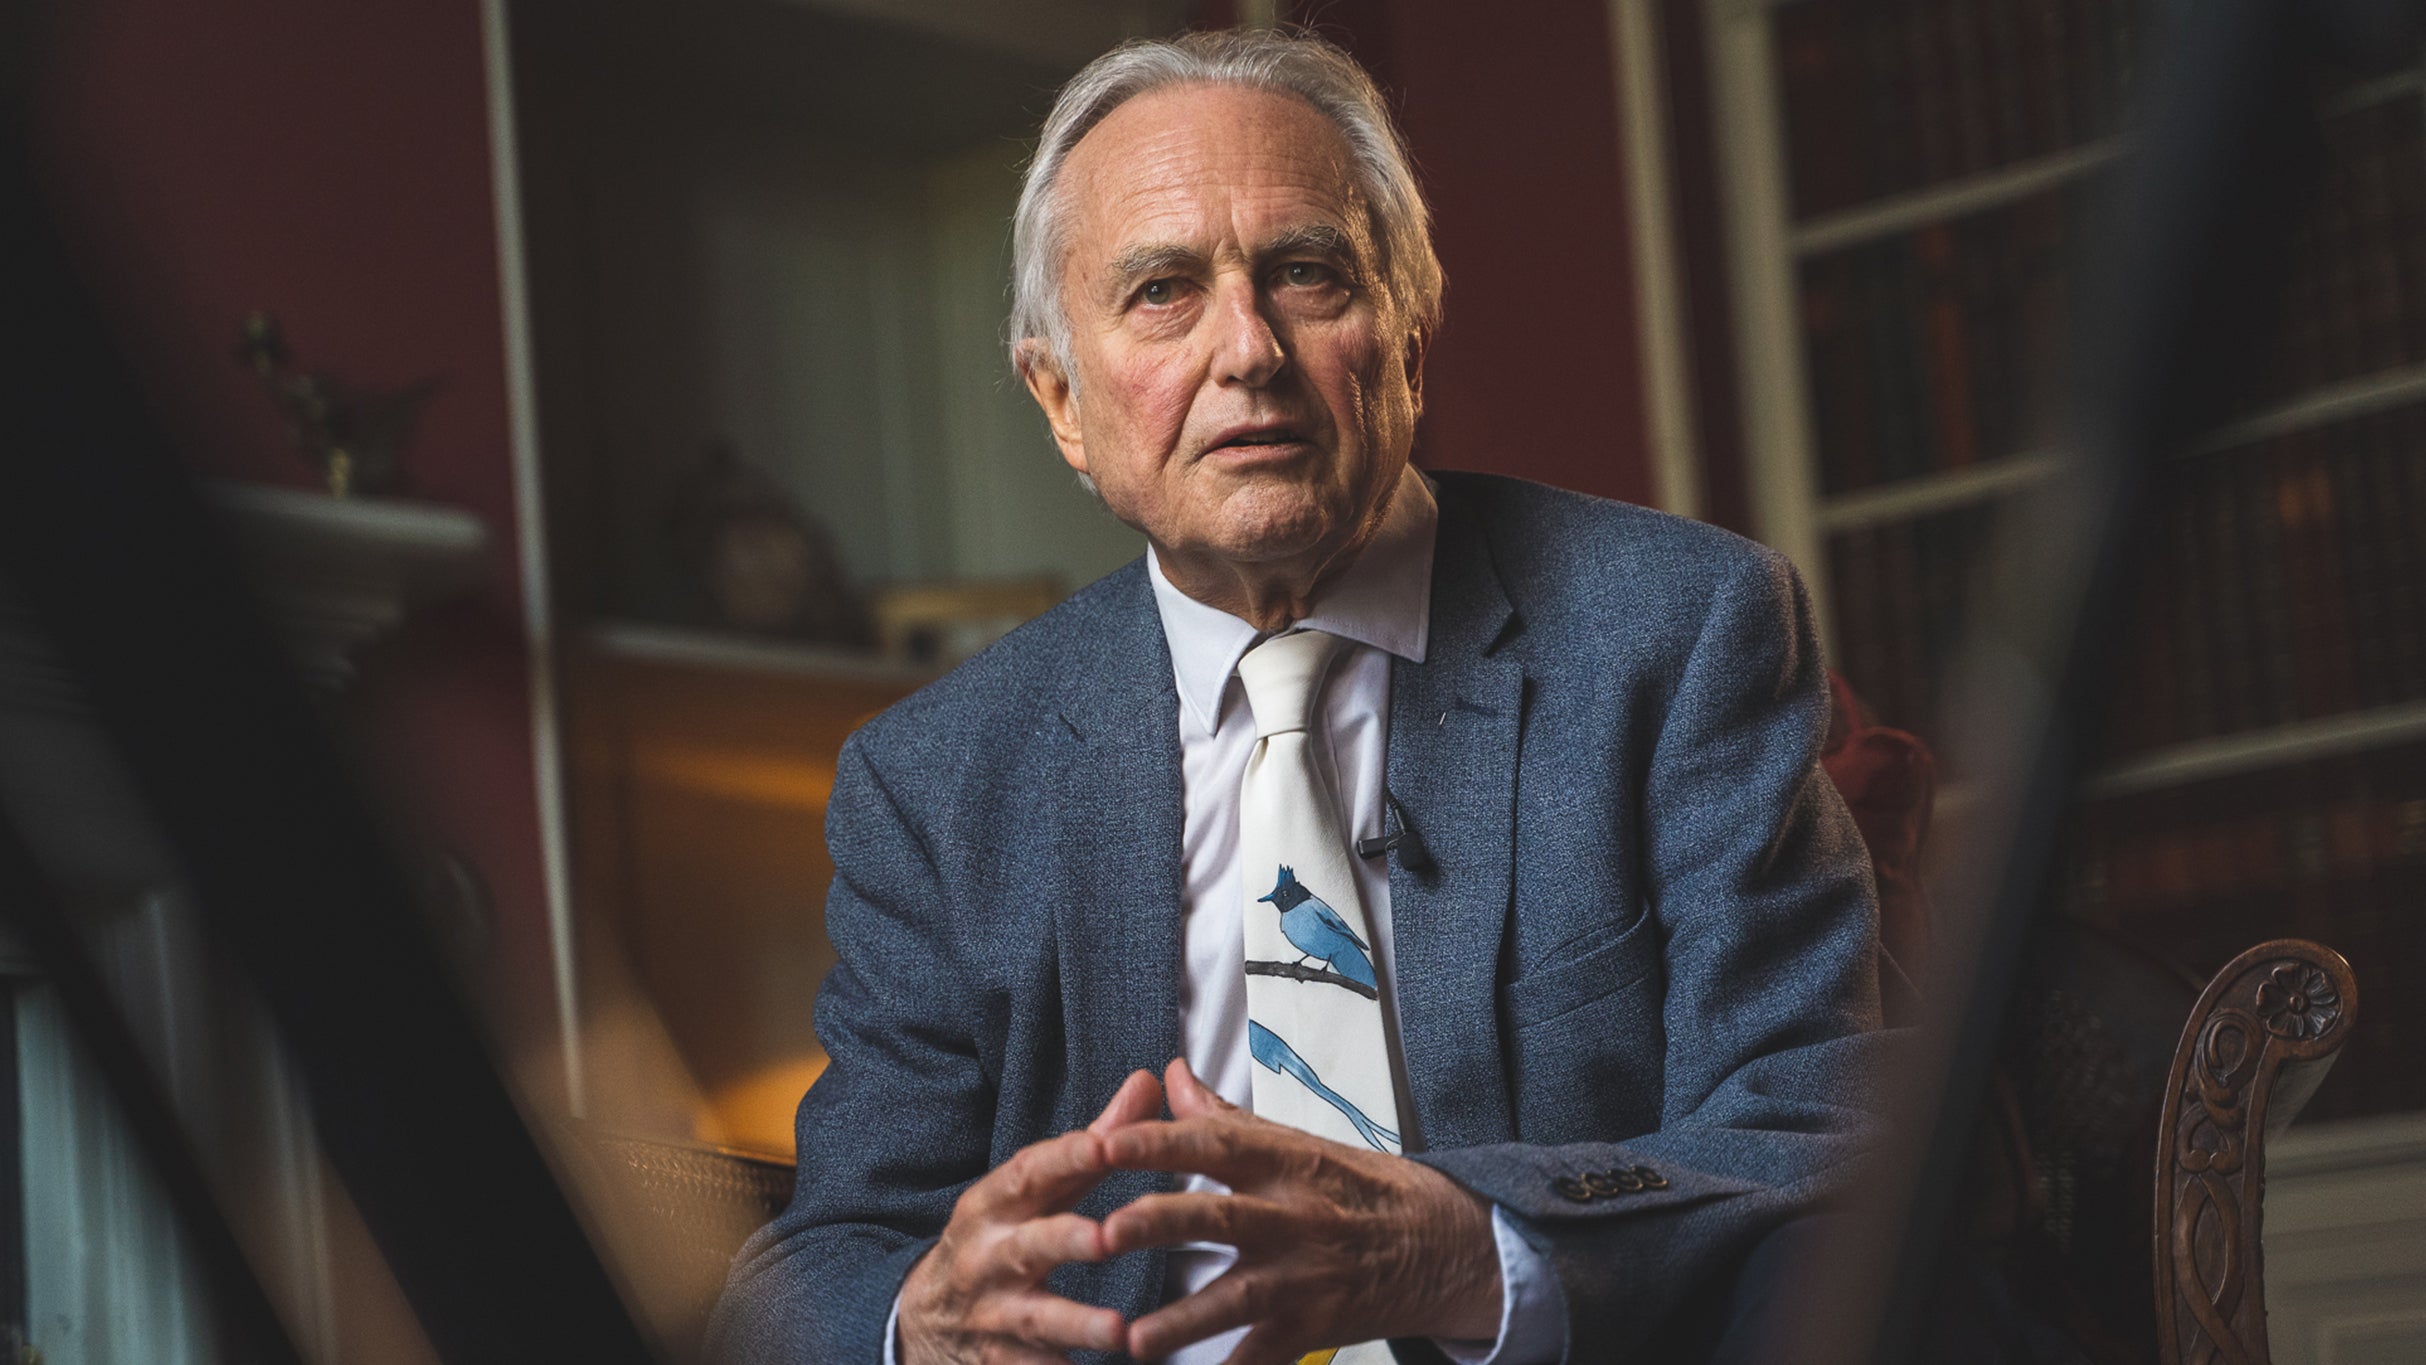 An Evening with Richard Dawkins and Friends  presale code for advance tickets in Washington